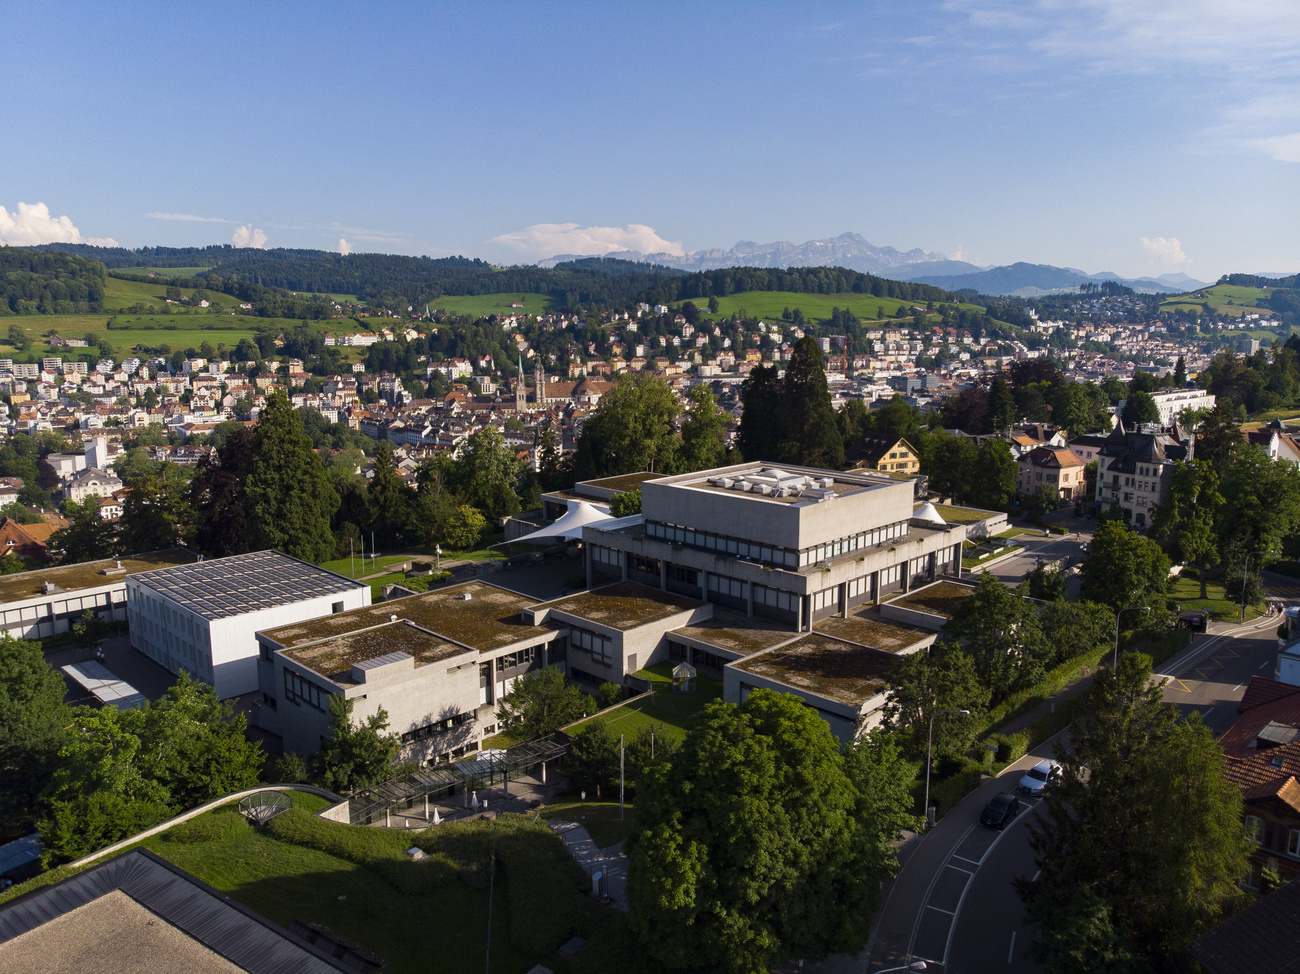 The University of St Gallen campus, as seen in 2019